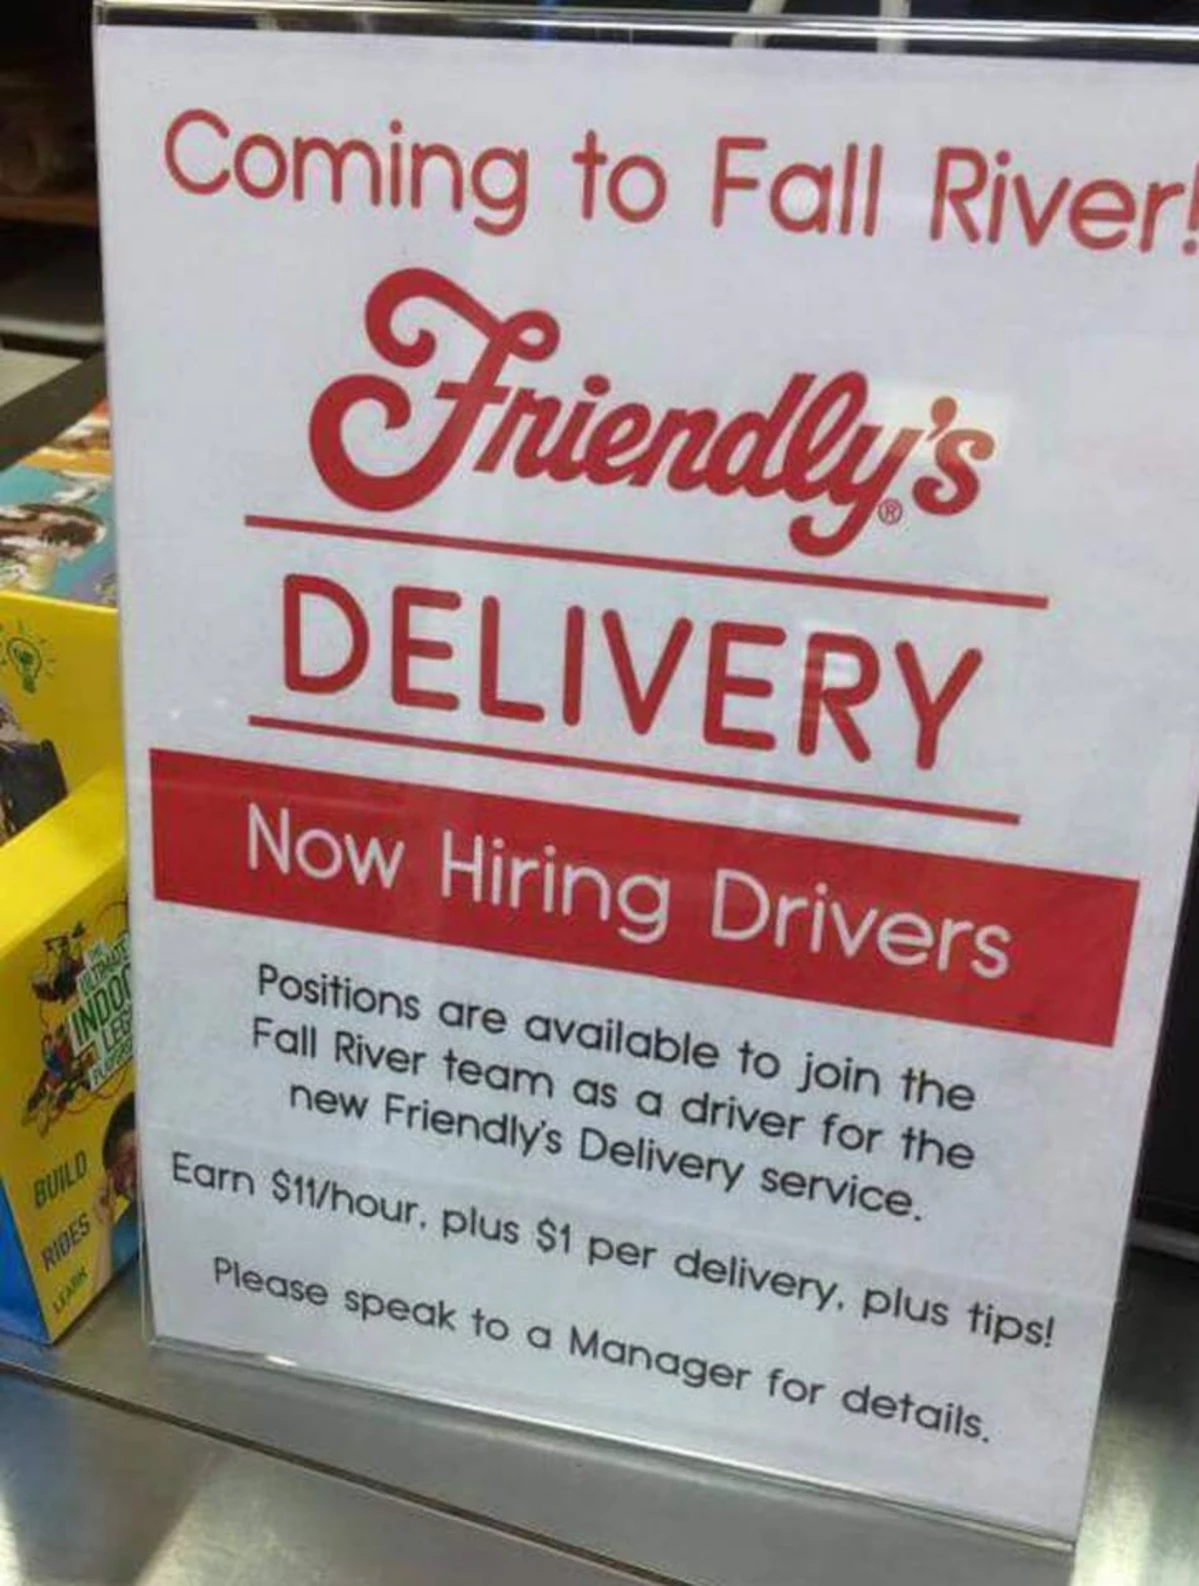 Fall River Friendly's Hiring Delivery Drivers